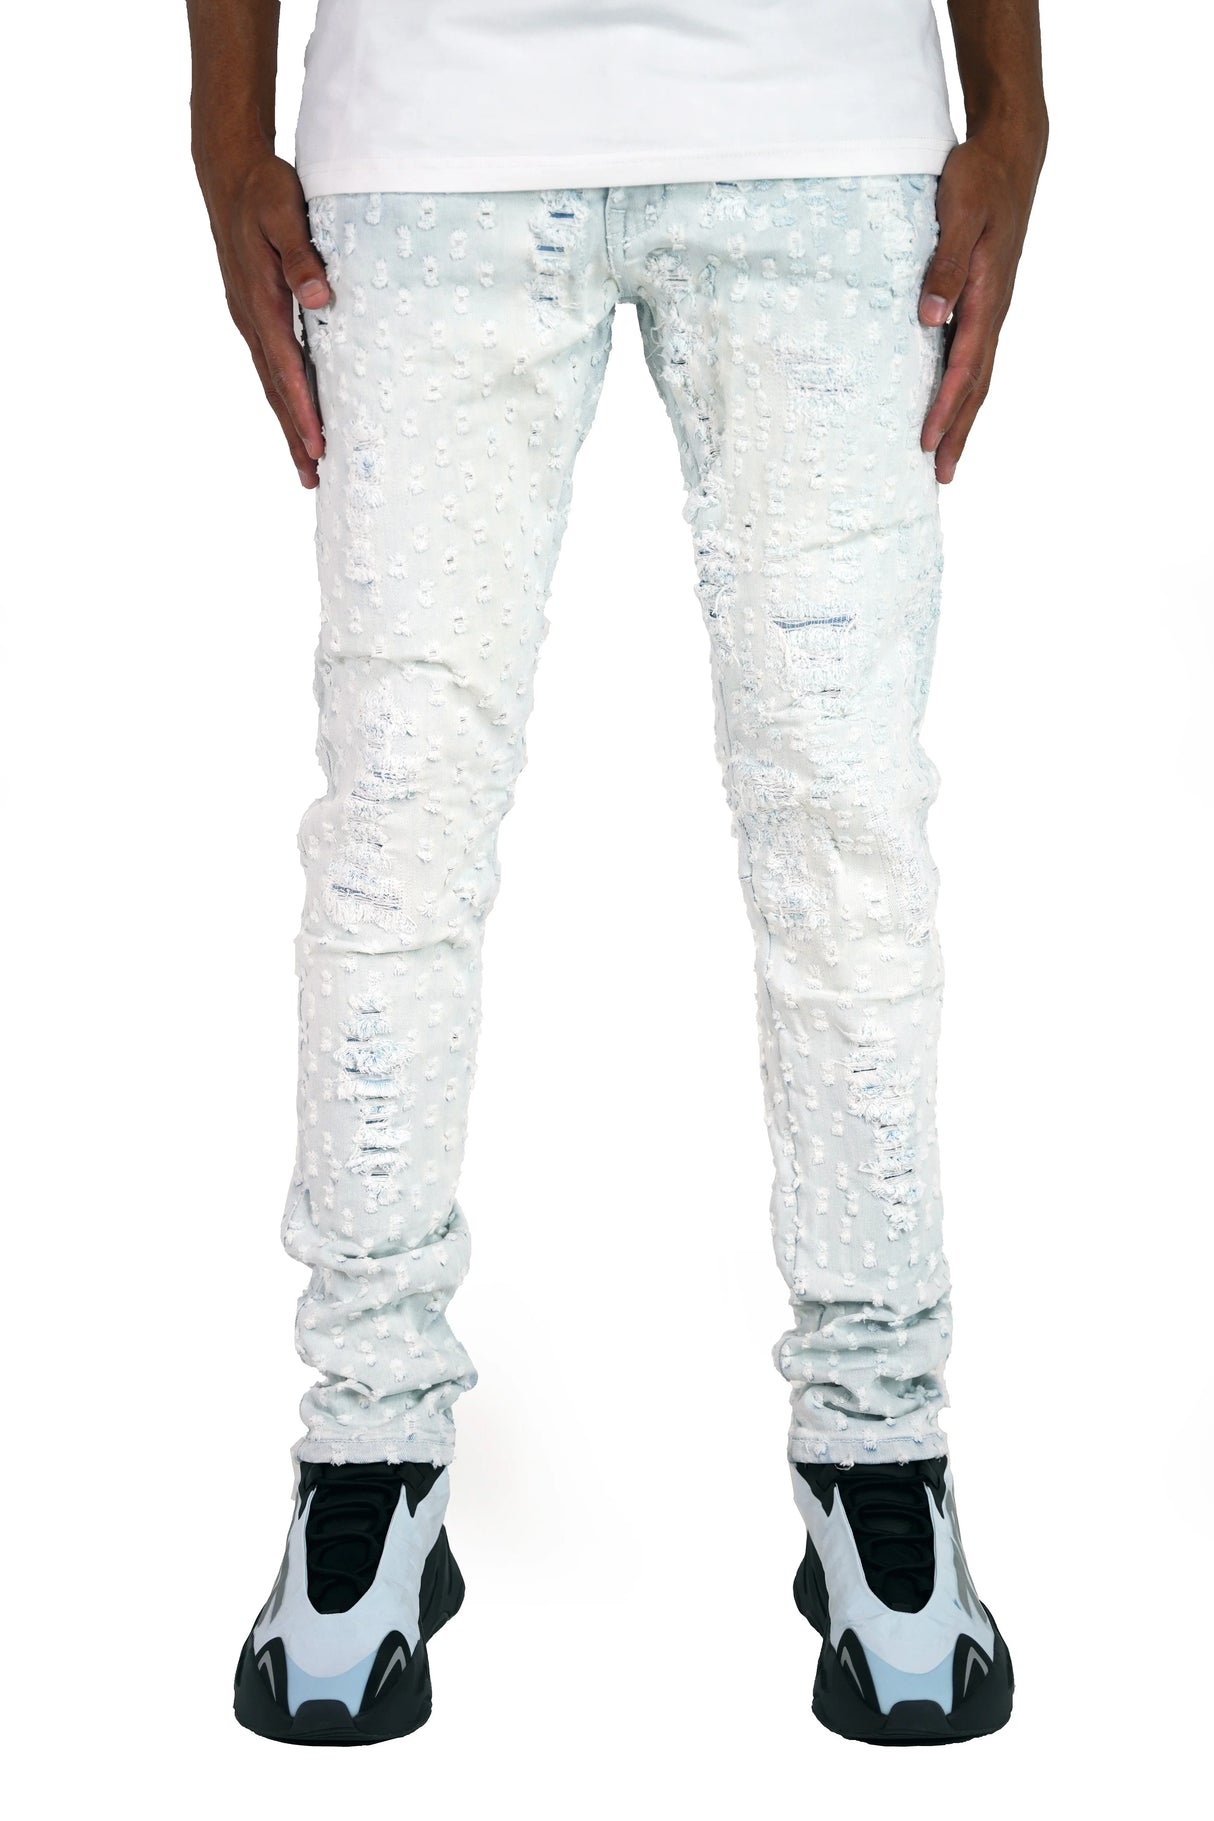 Focus - Jeans - Pin Distressed - Light Blue